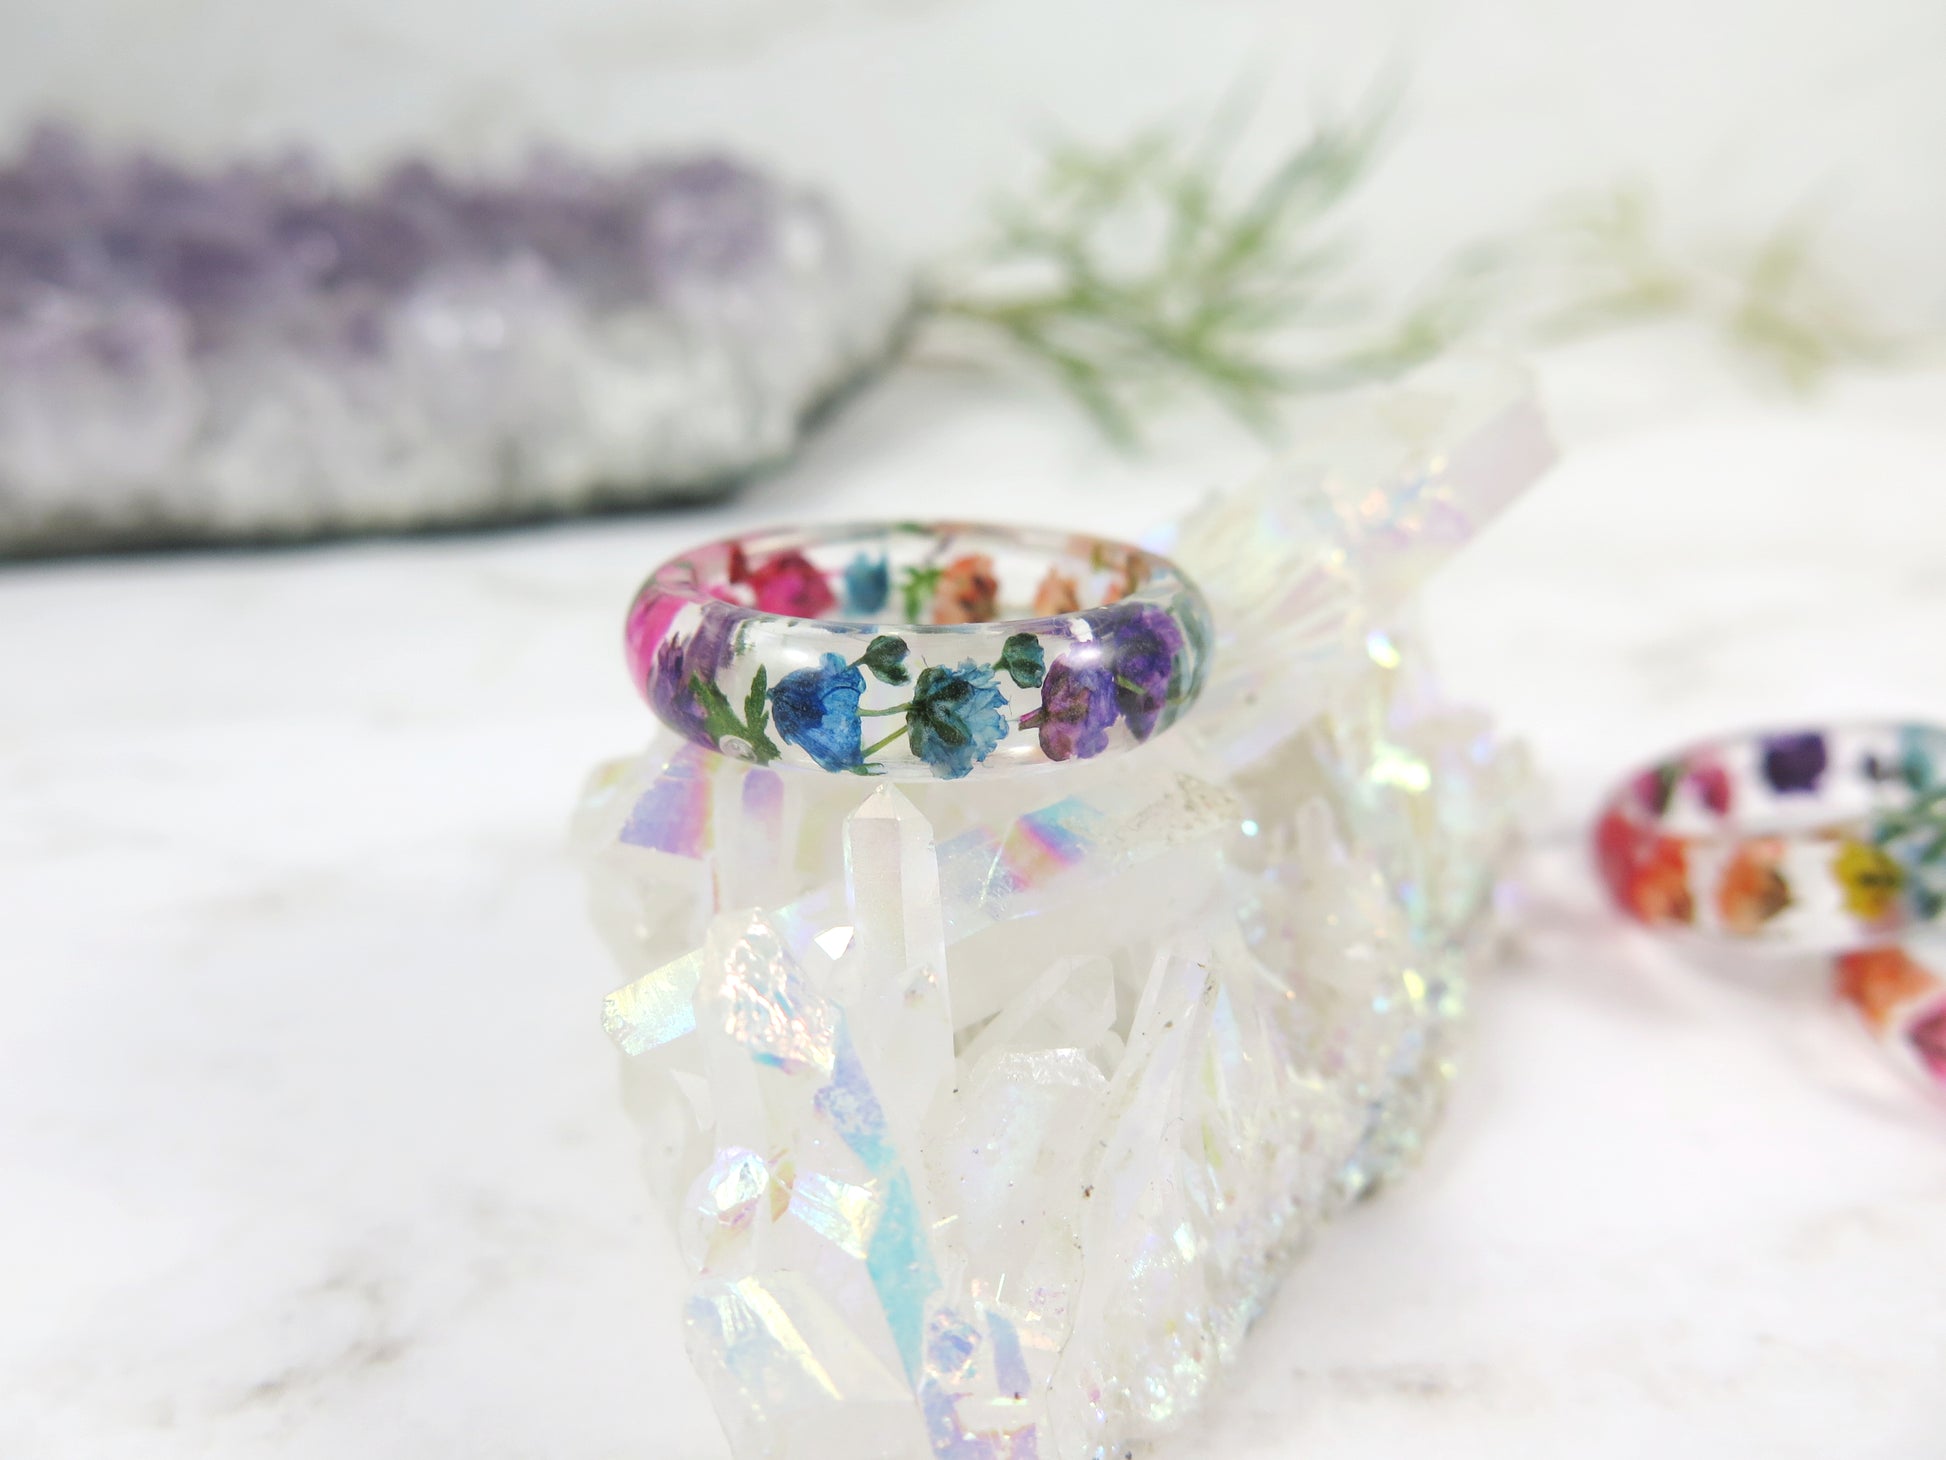 real flowers embeded into crystal clear resin and shaped into band ring